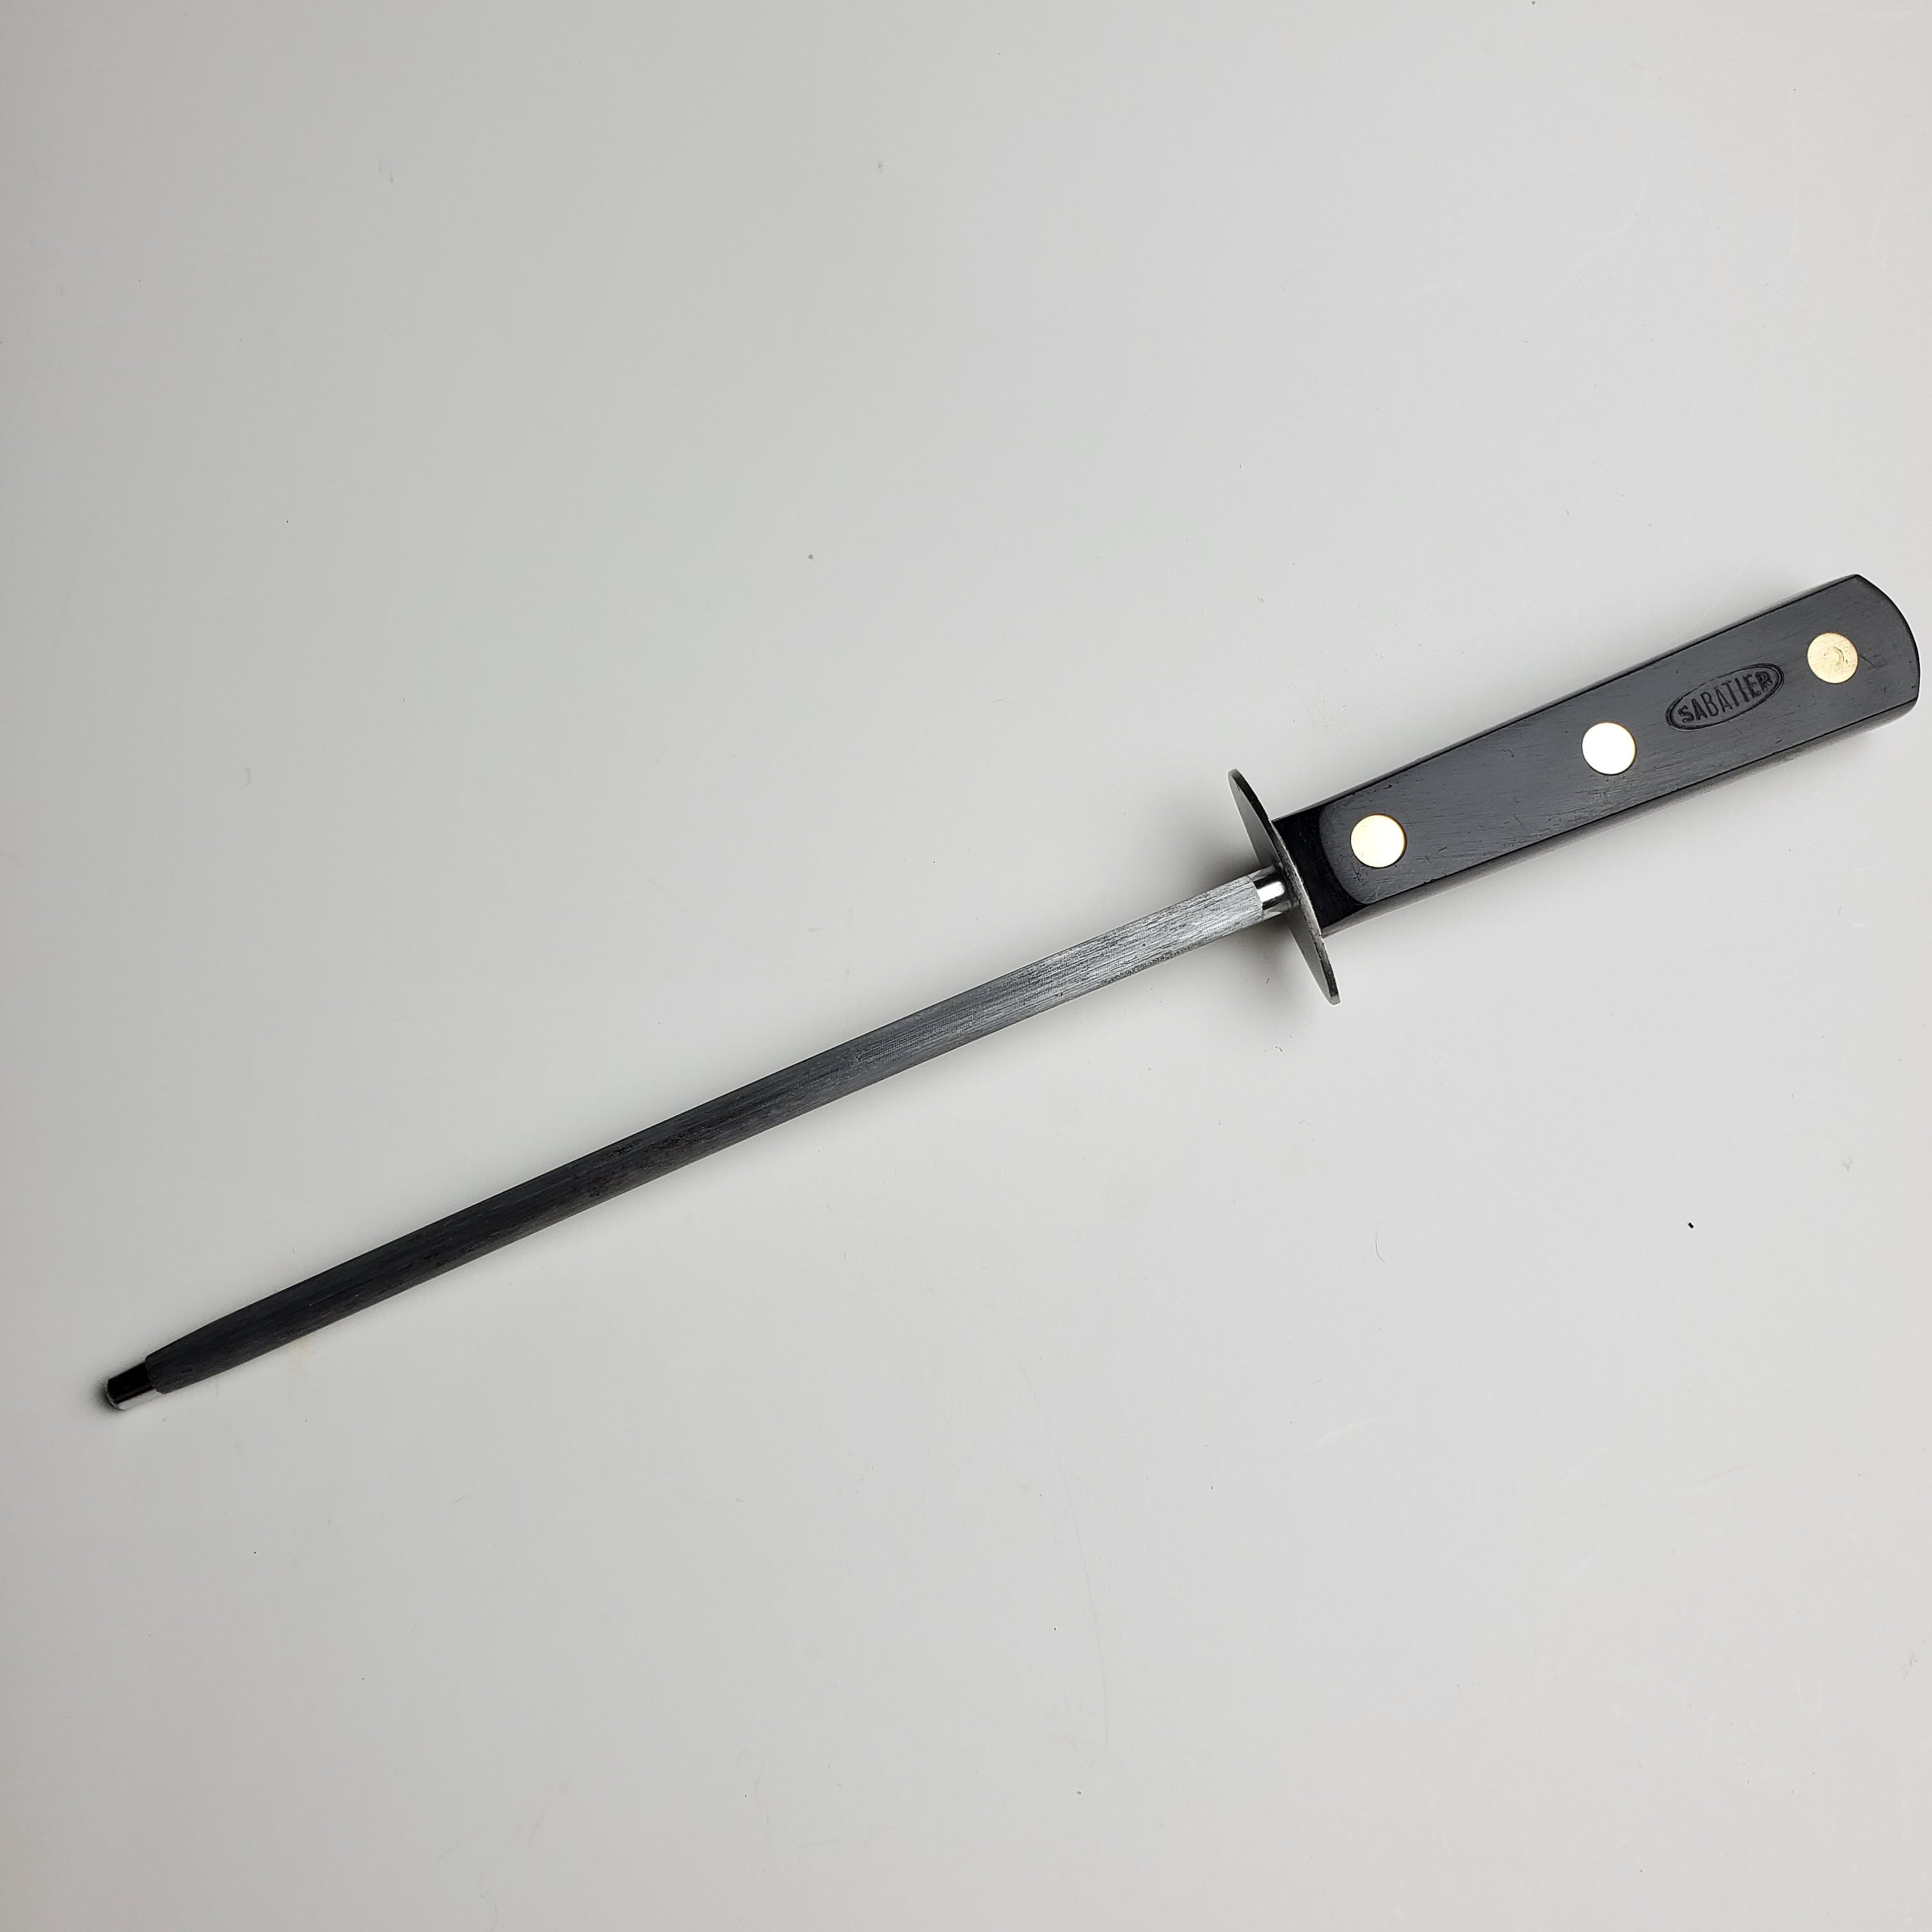 Veritable Sabatier French Made Cook's Knife 25cm